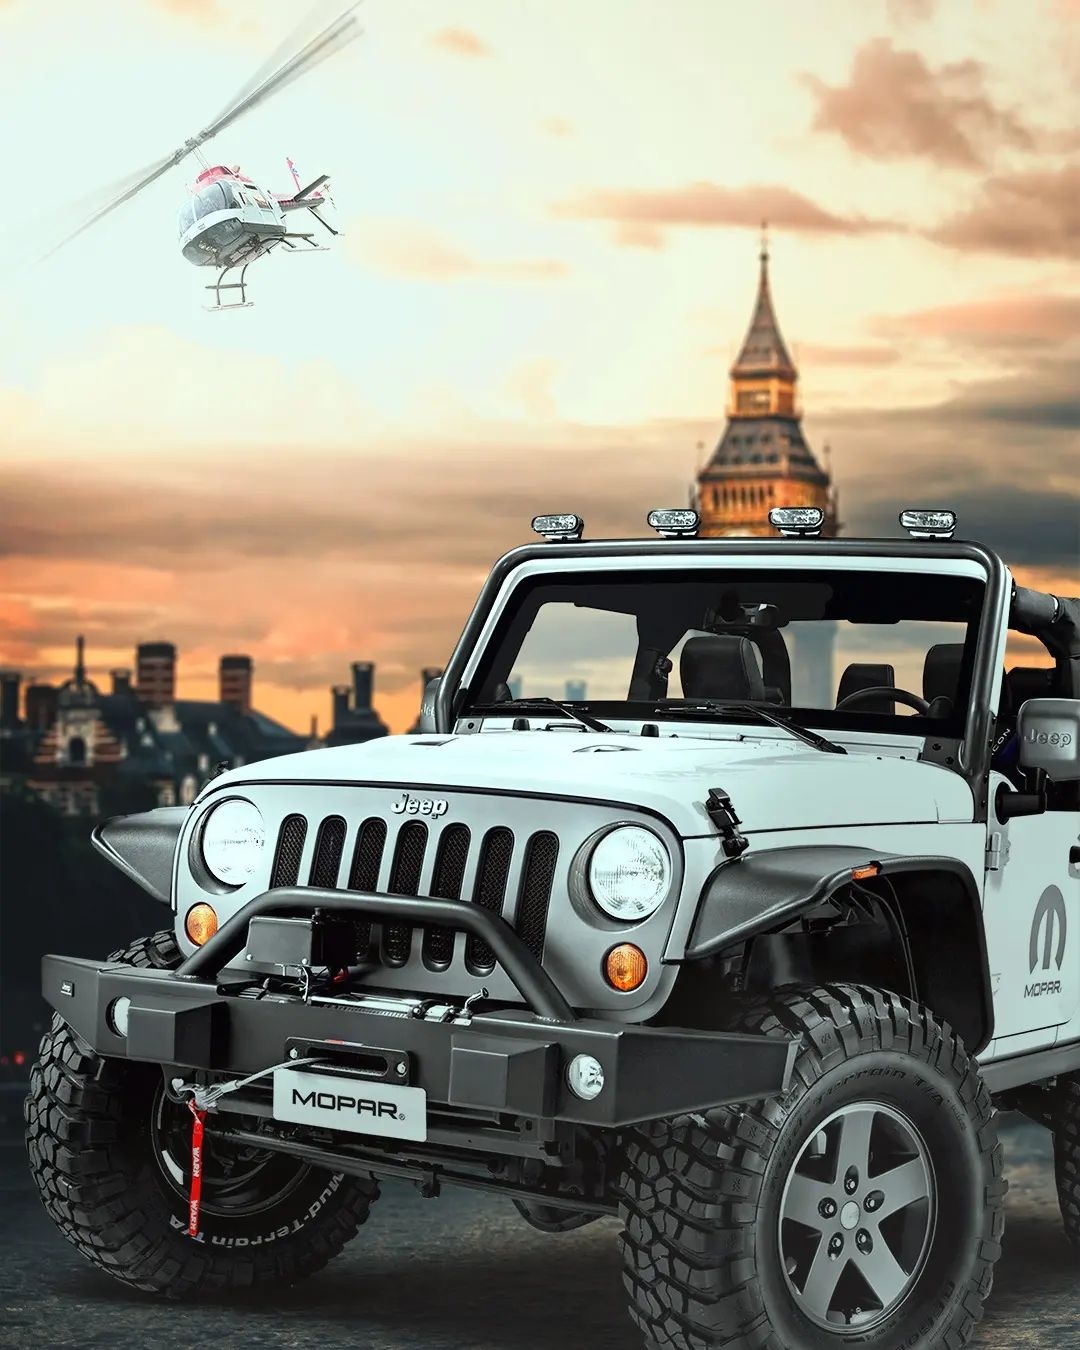 🔥 White Jeep In City Photo Editing Background Download | Cbeditz